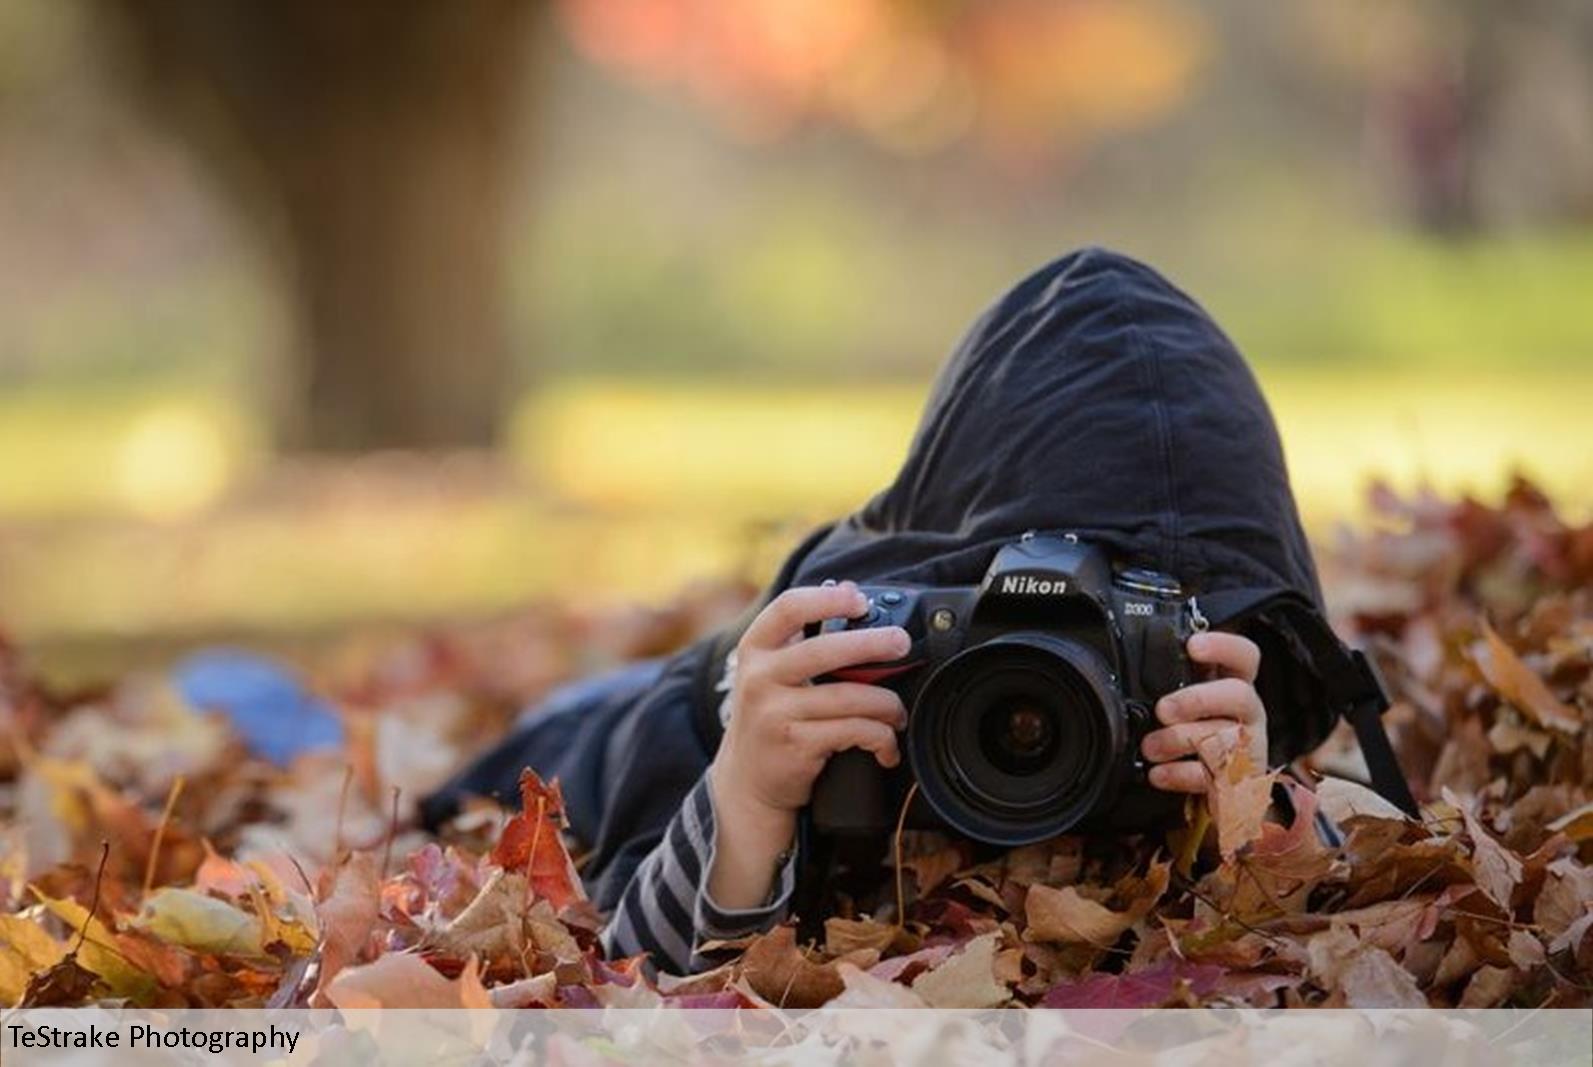 Child taking photo in the leaves